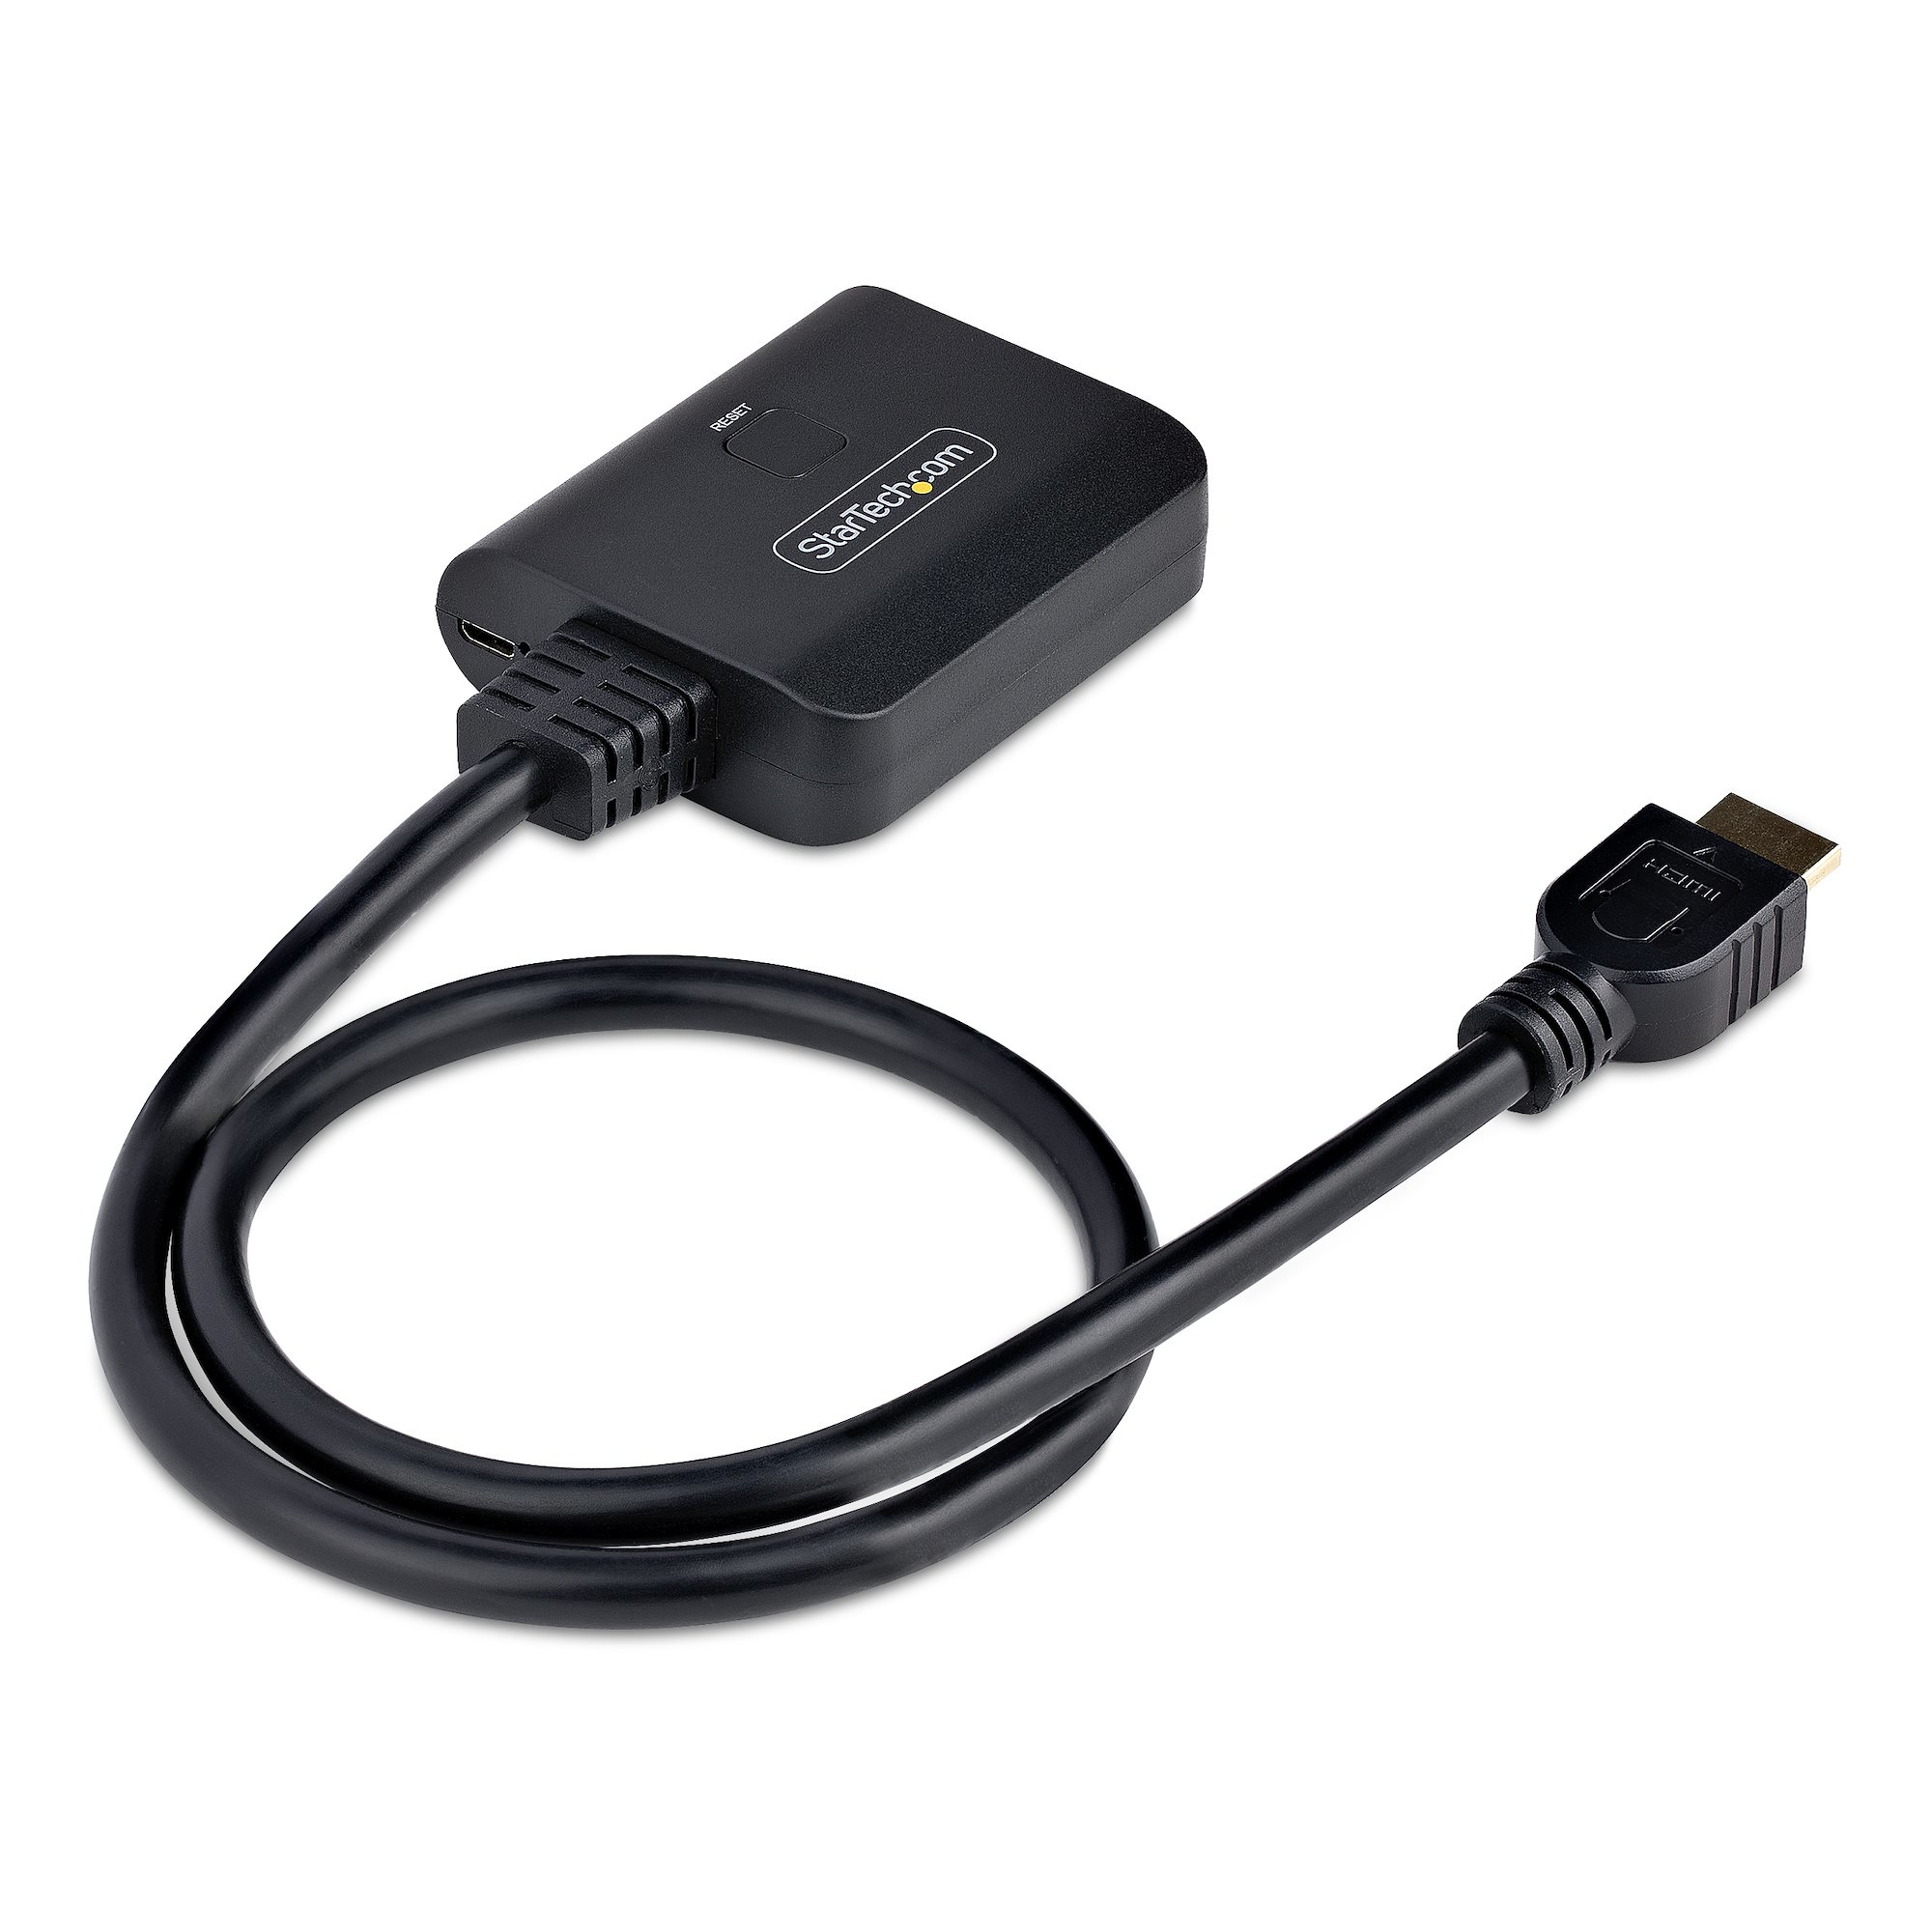 HDMI Splitter with HD HDMI Cable, 1 in 2 Out 4K HDMI Splitter for